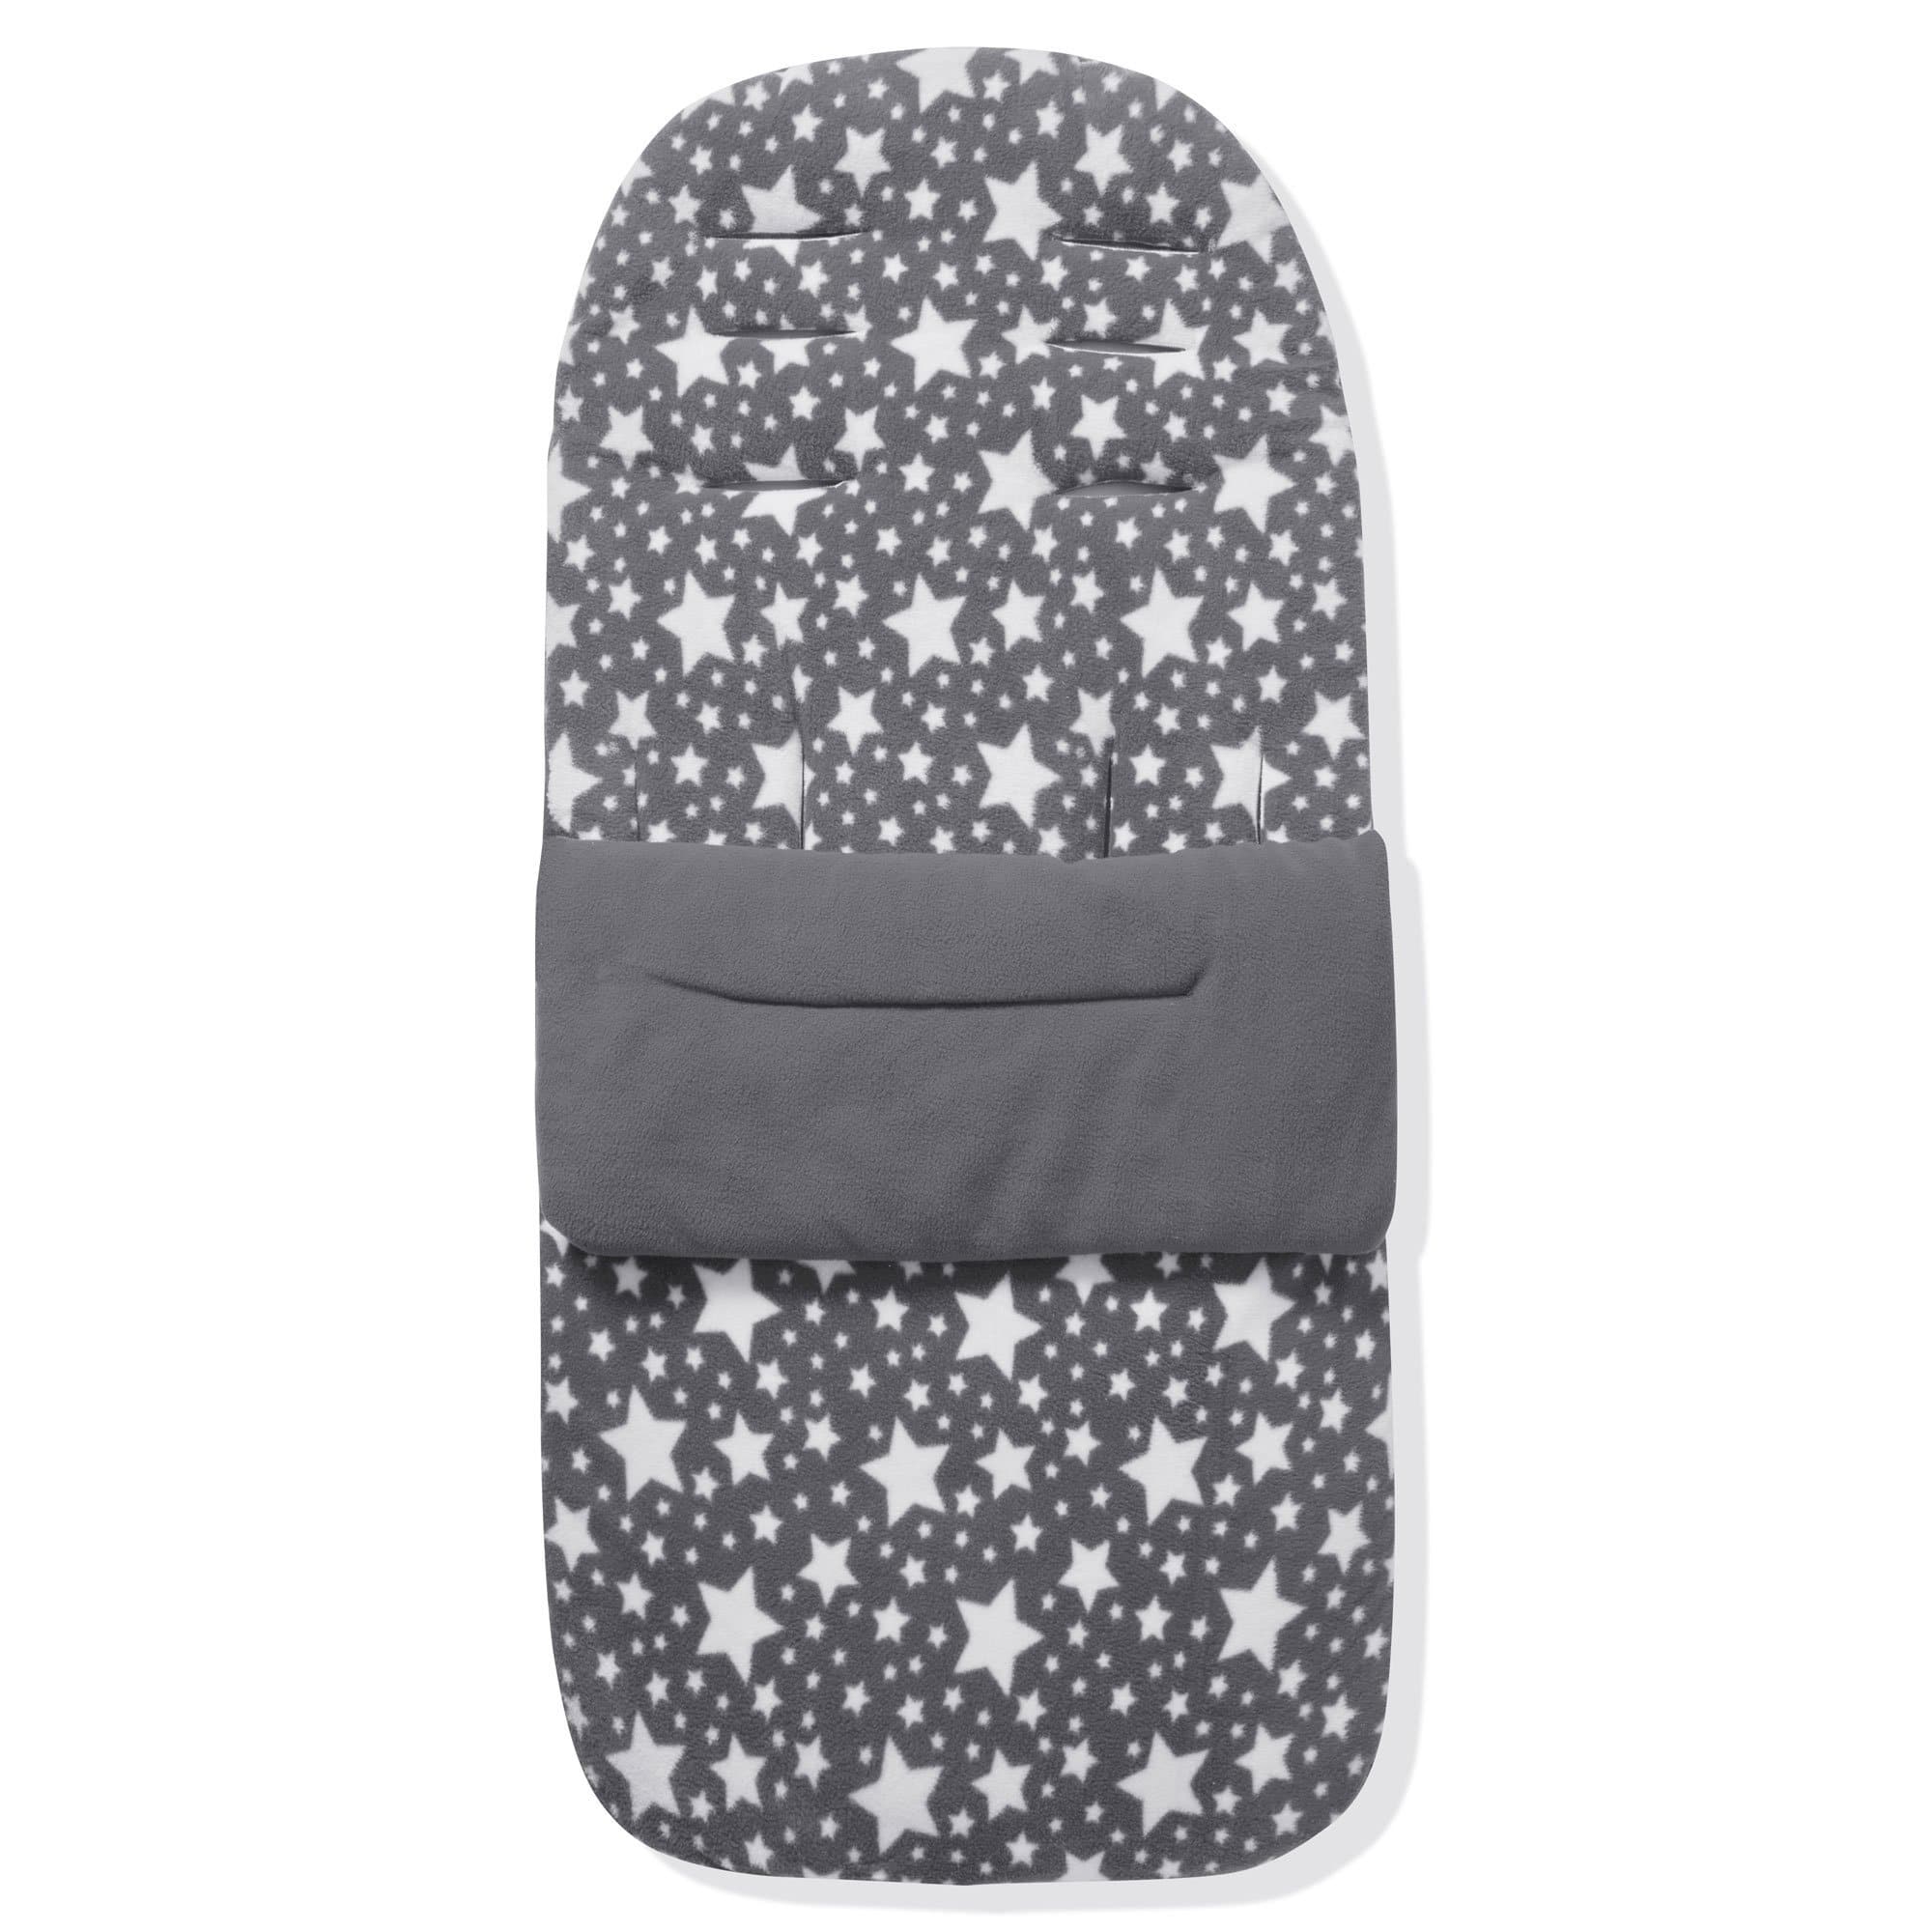 Fleece Footmuff / Cosy Toes Compatible with Peg Perego - For Your Little One